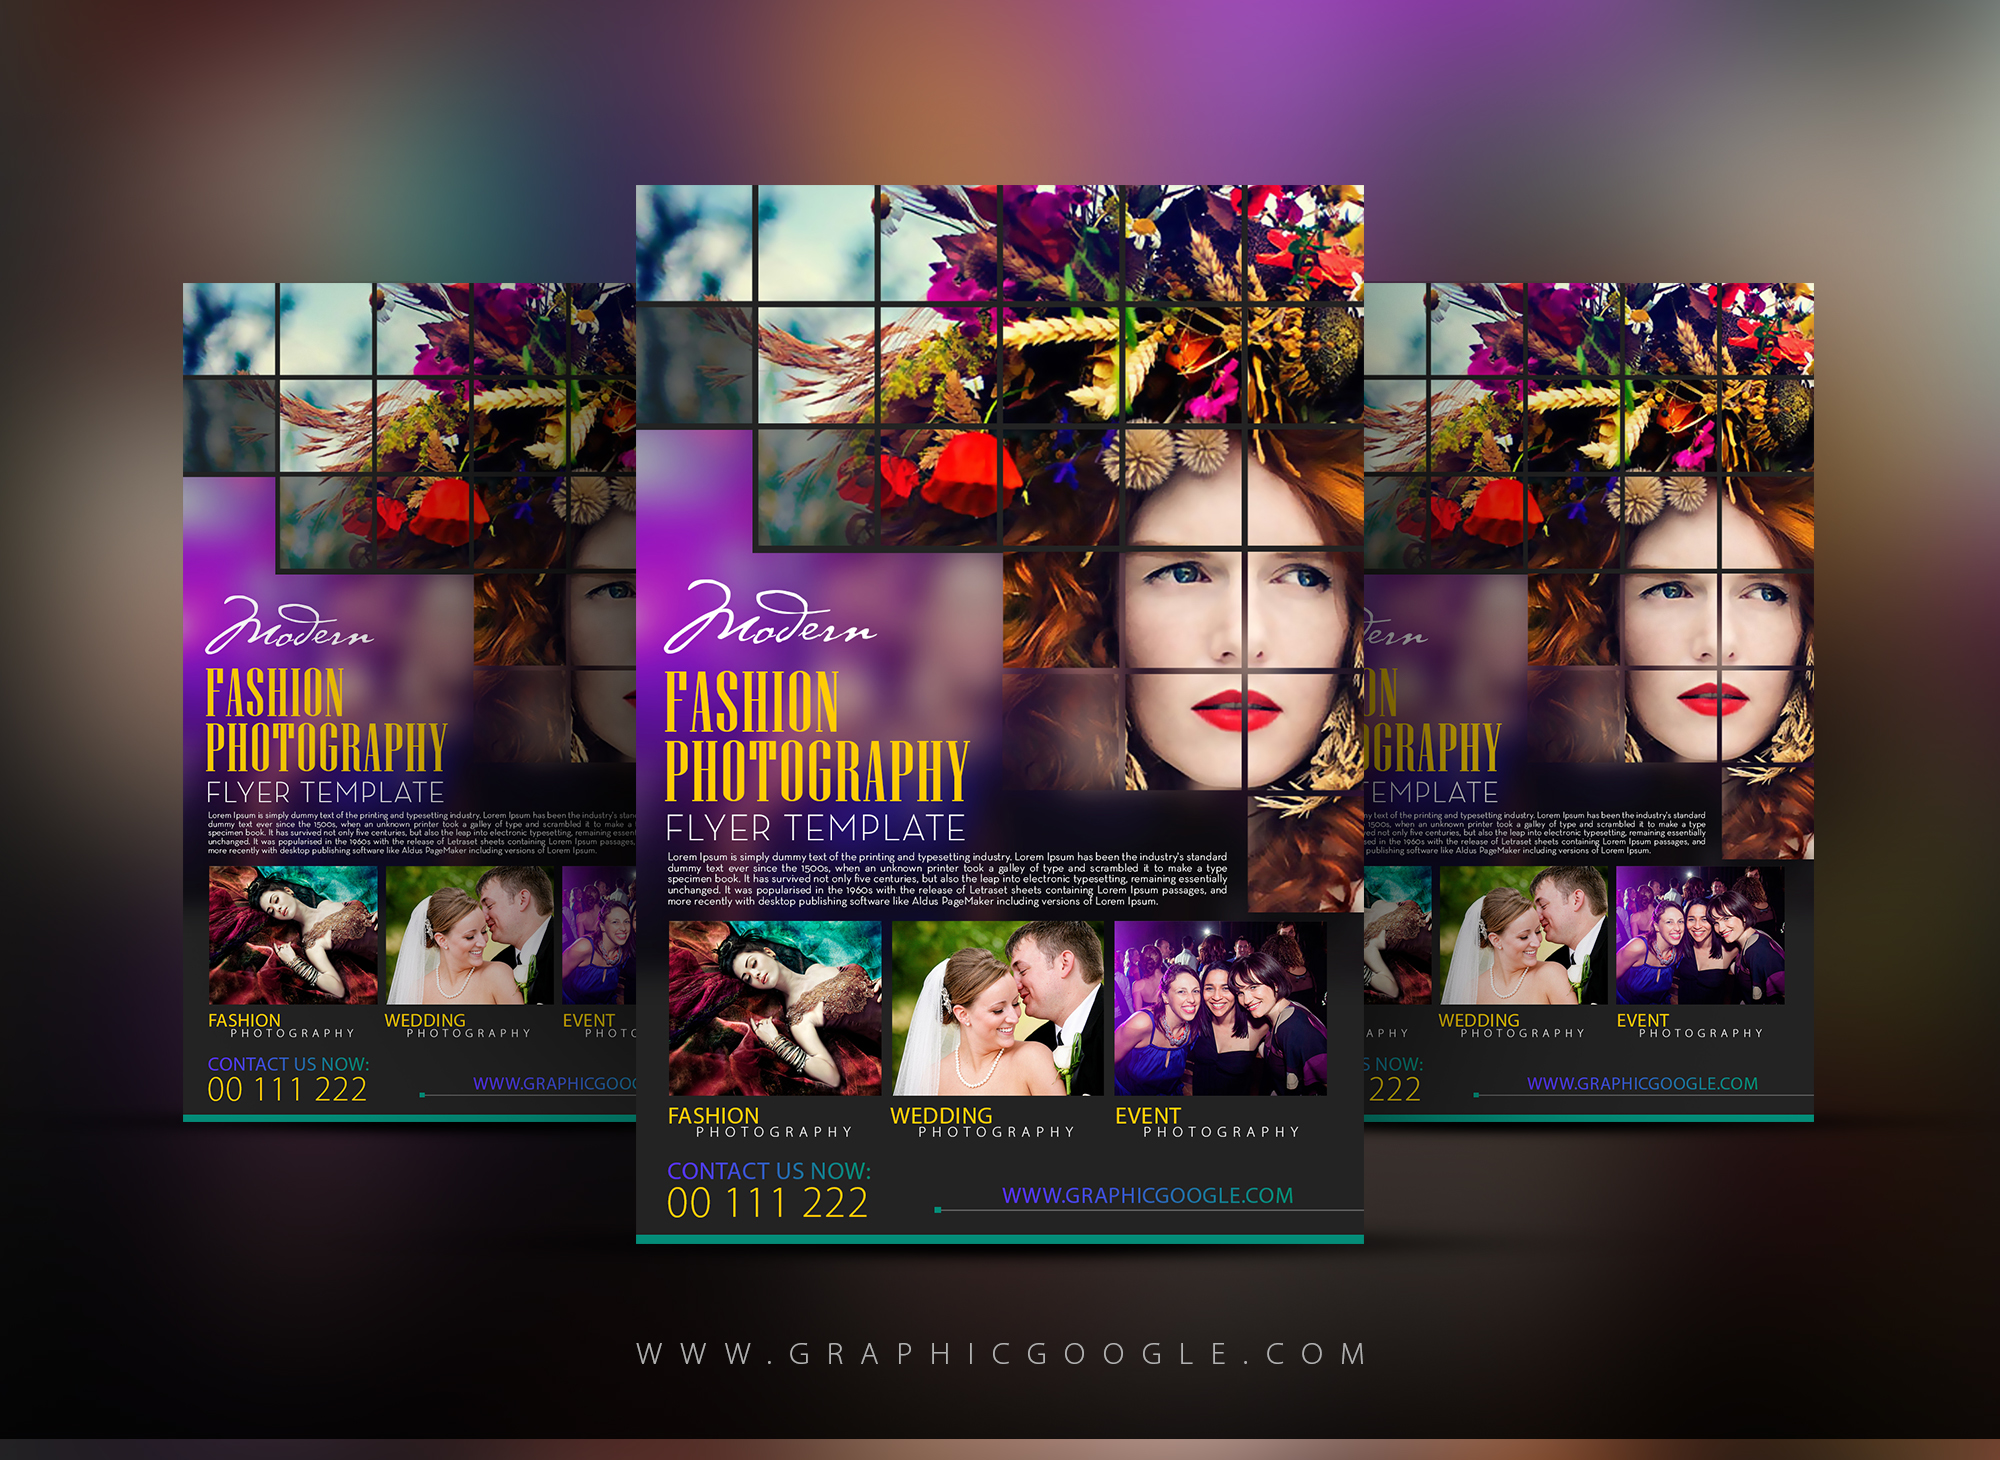 Free Modern Fashion Photography Flyer Template-300